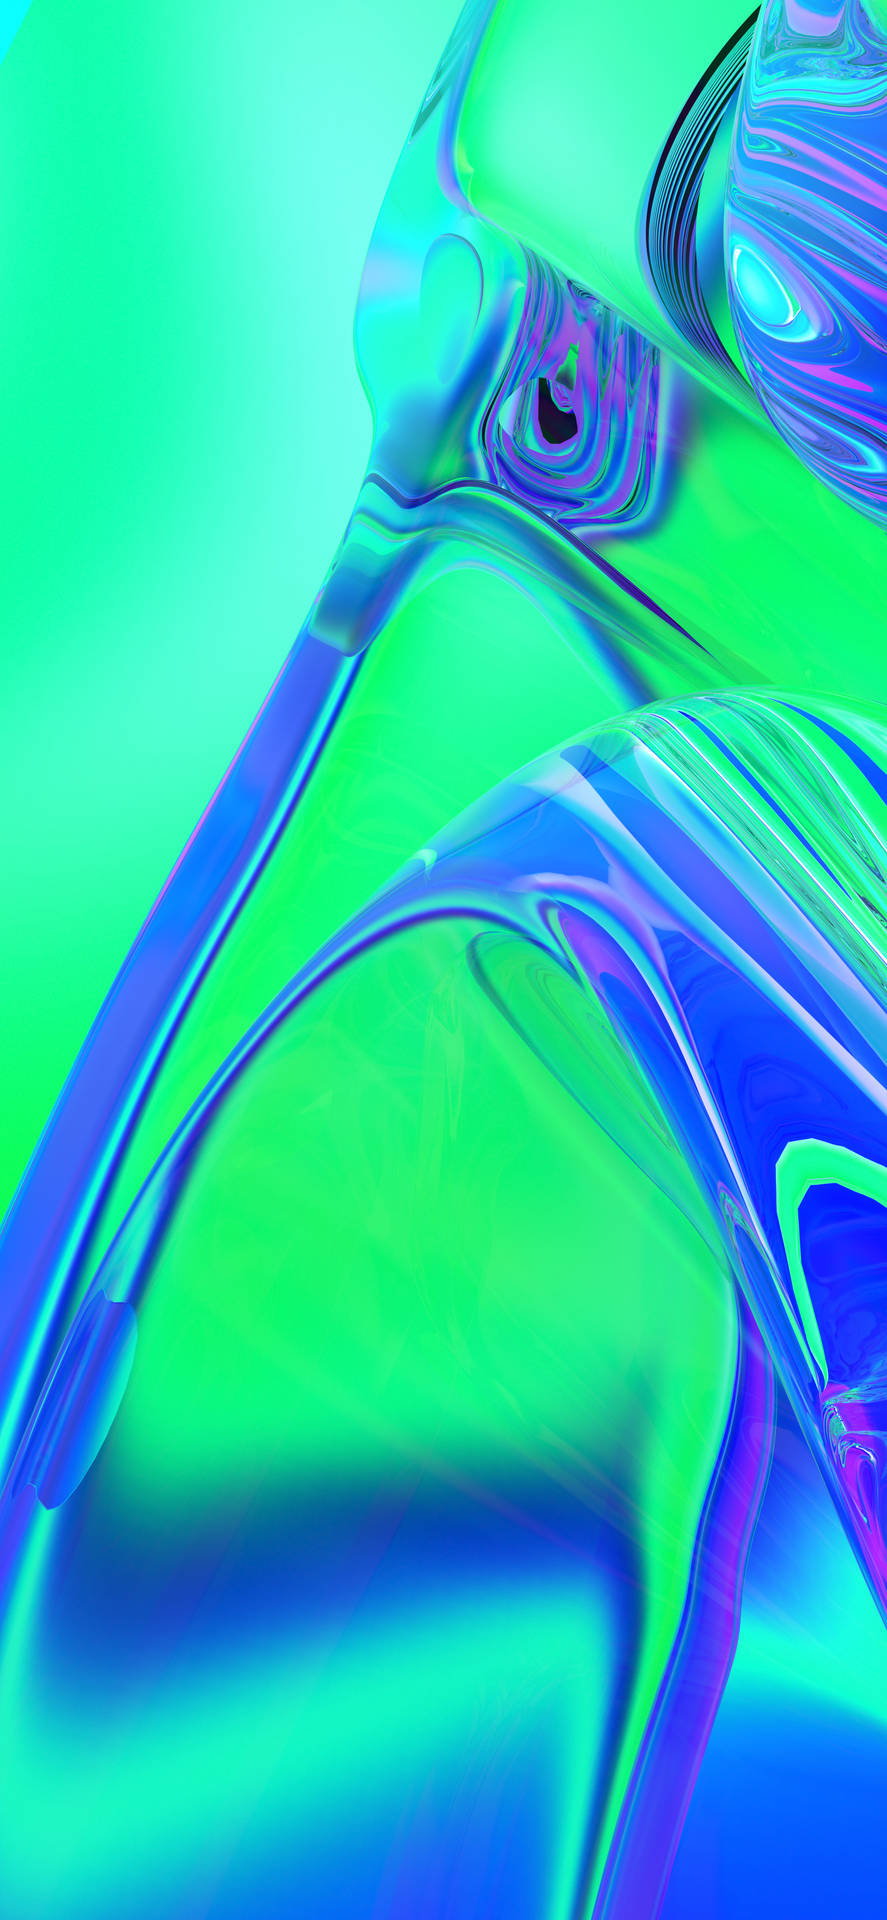 Close-up Green Liquid Surface Mobile 3d Background